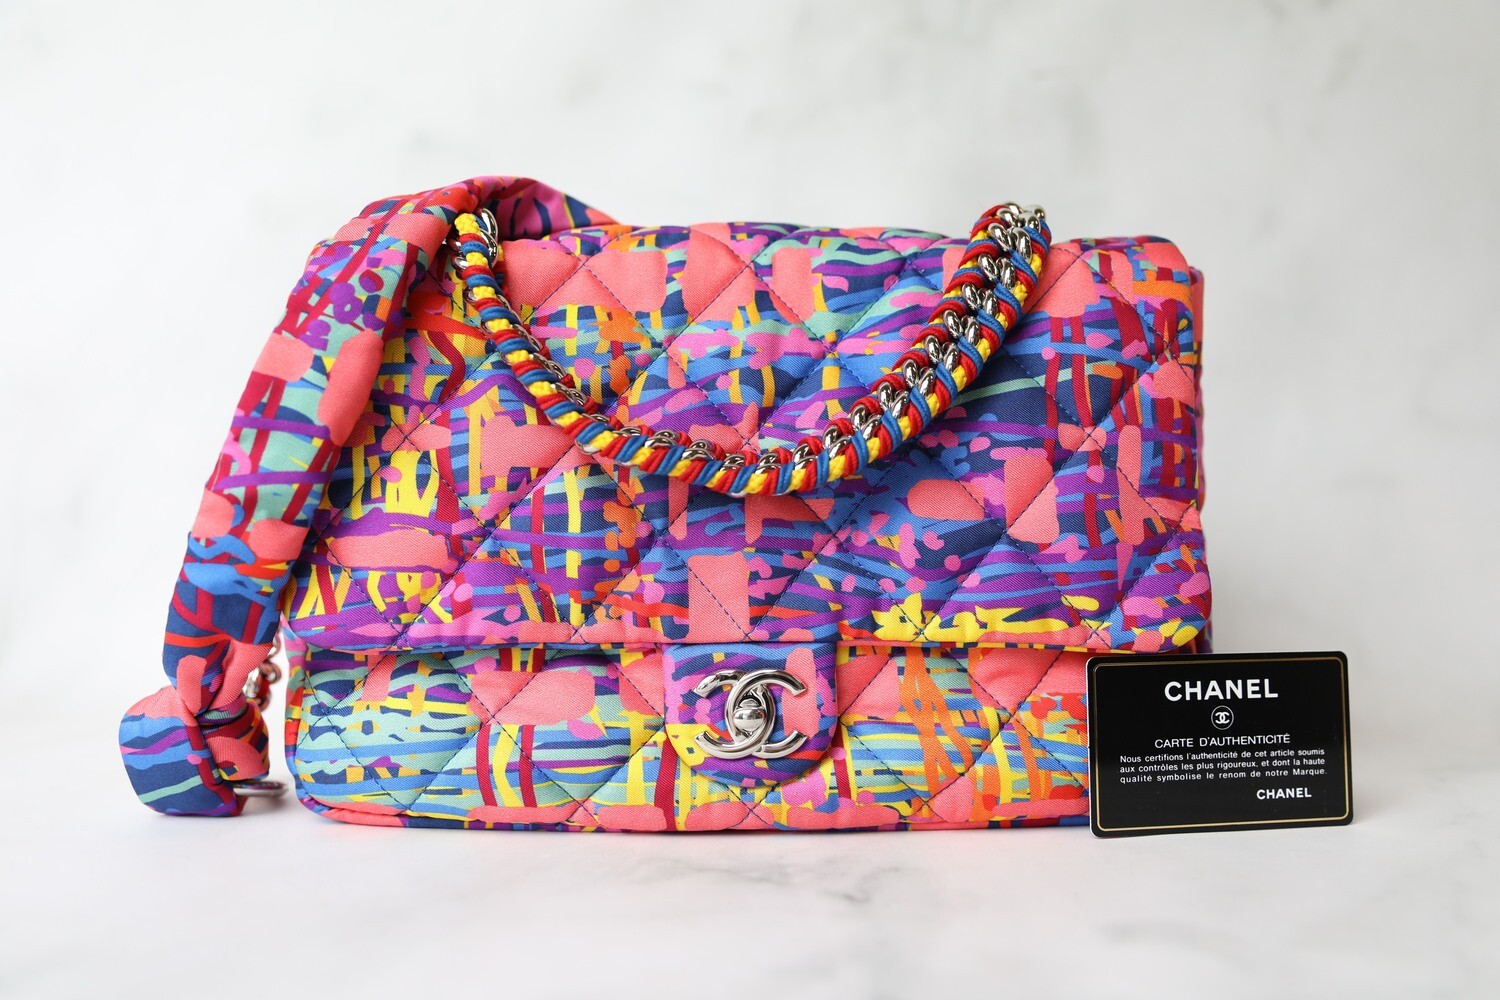 Chanel Foulard Bag Small, Multicolor Fabric with Silver Hardware, Preowned  in Dustbag WA001